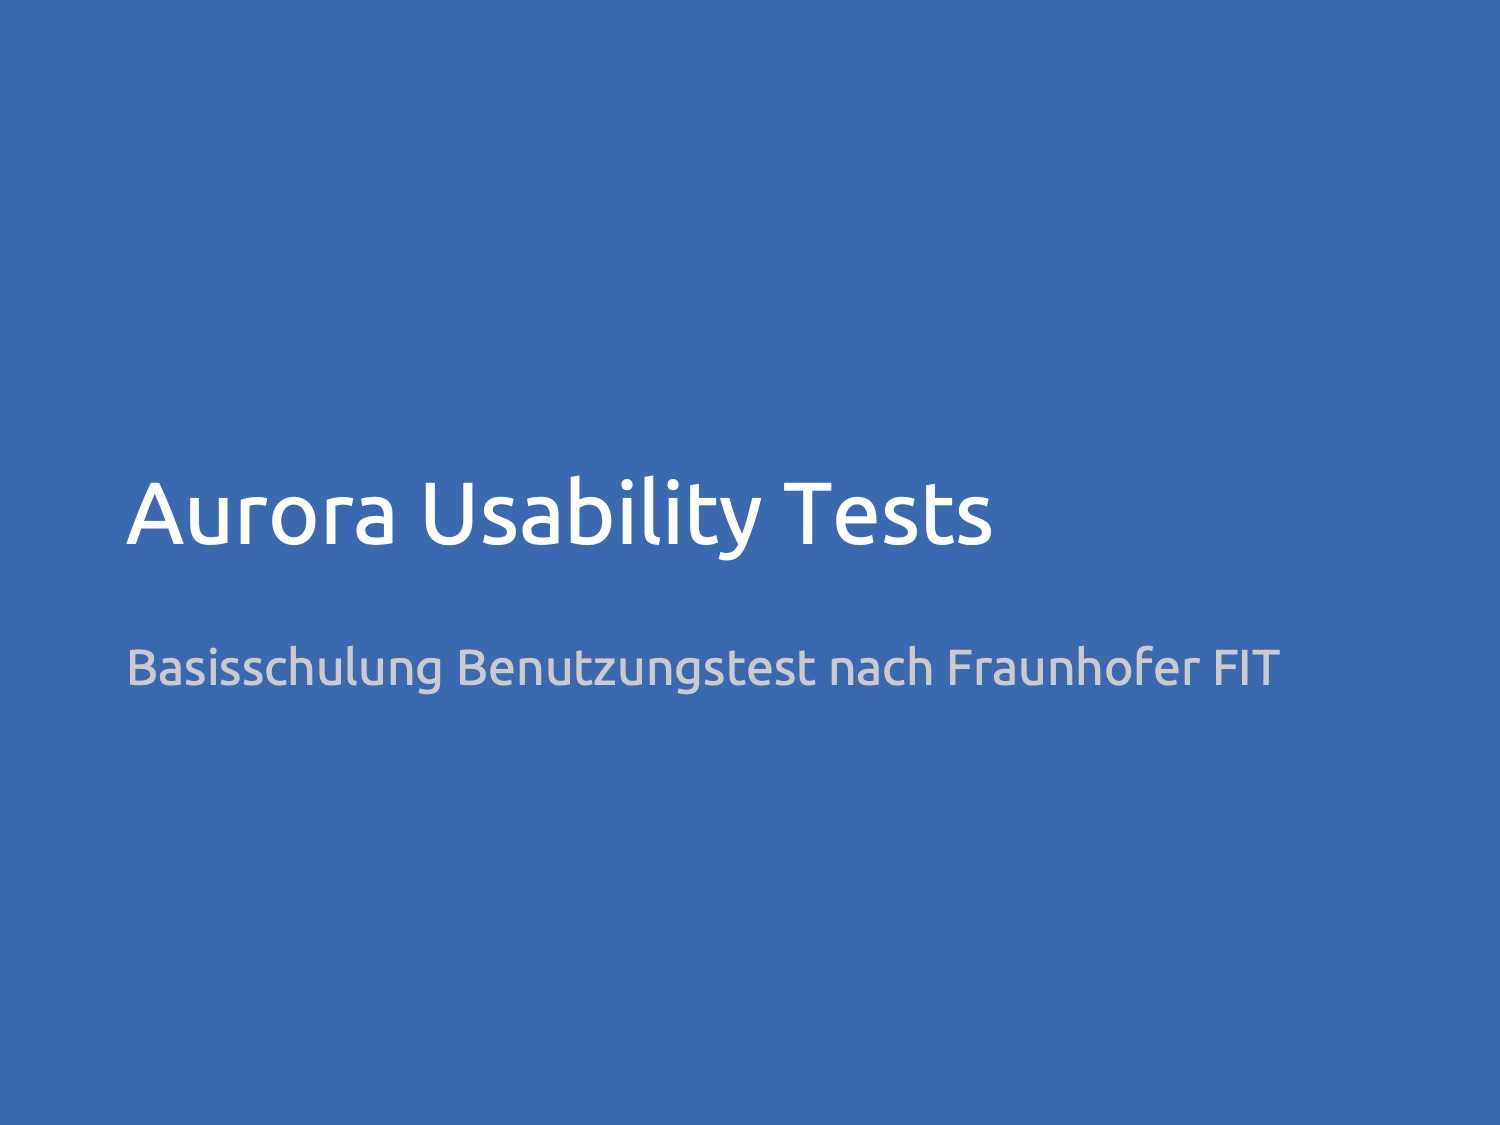 Start slide of the usability test training for the new software